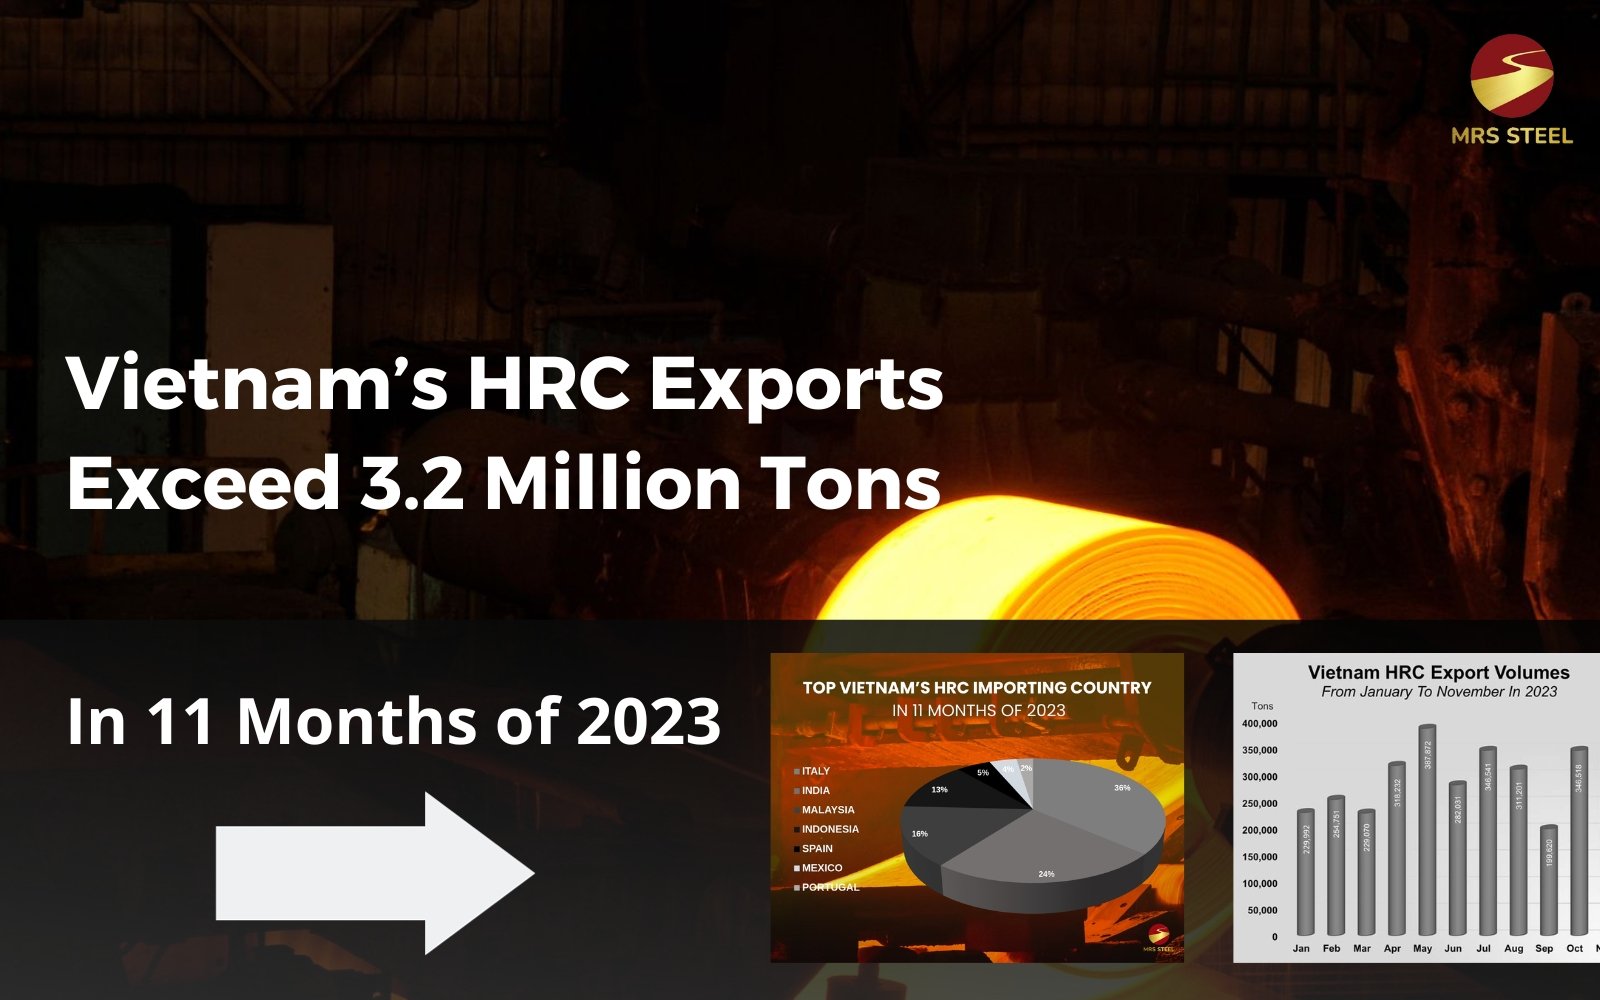 Vietnam's HRC export volume exceeded 3.2 million tons in the 11 months of 2023